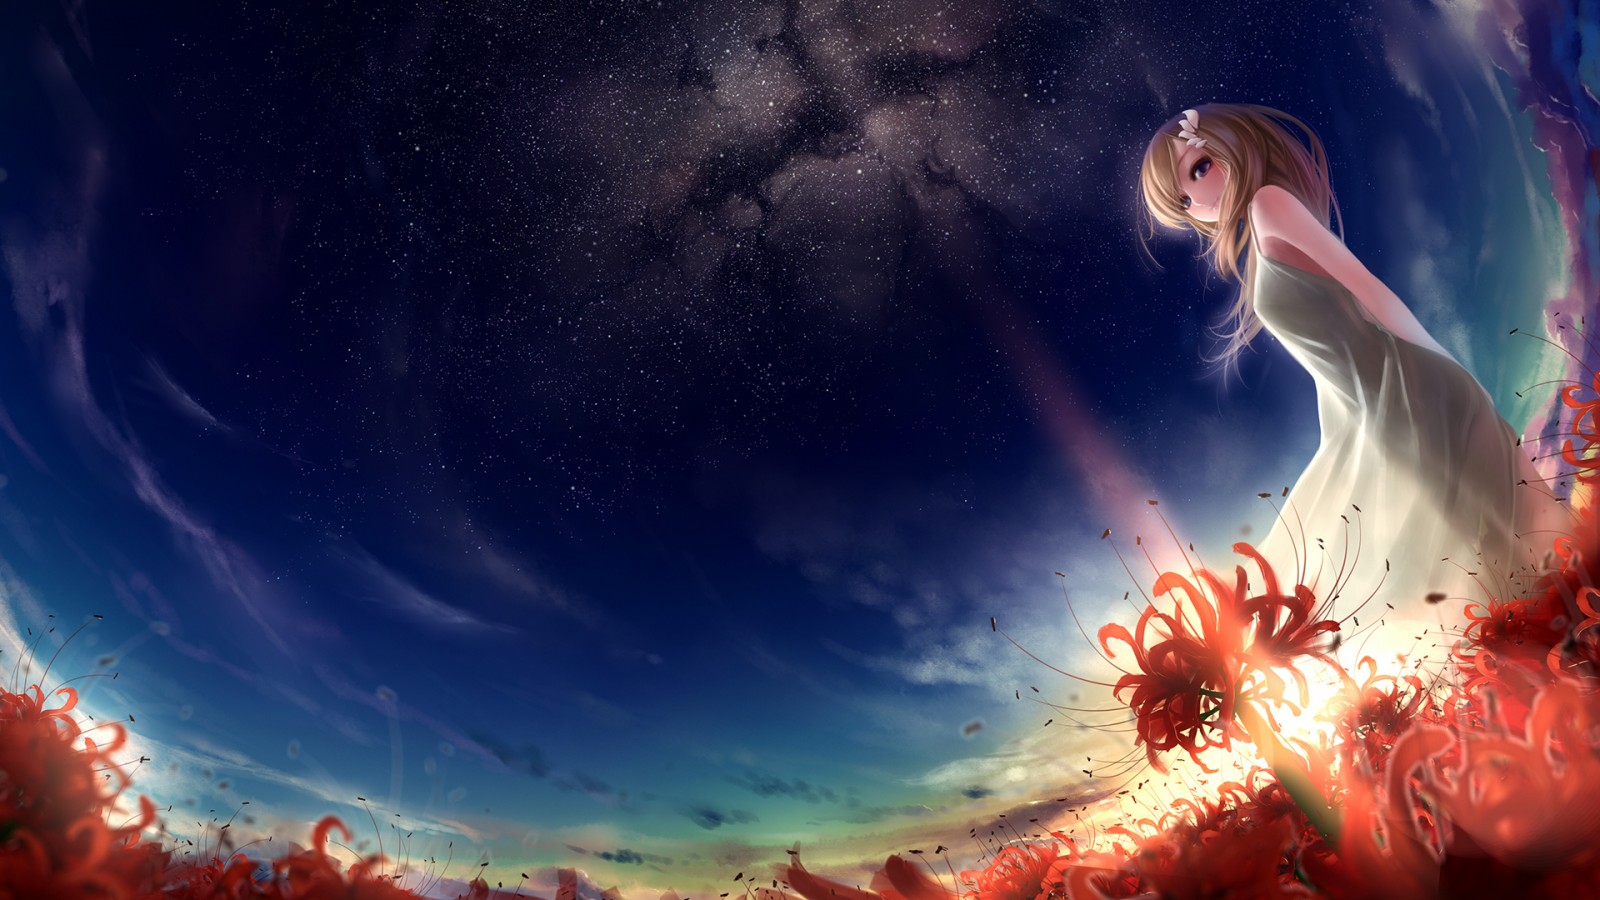 flowers, anime, anime girls, red, stars, universe, darkness, screenshot, computer wallpaper, special effects, outer space High quality walls